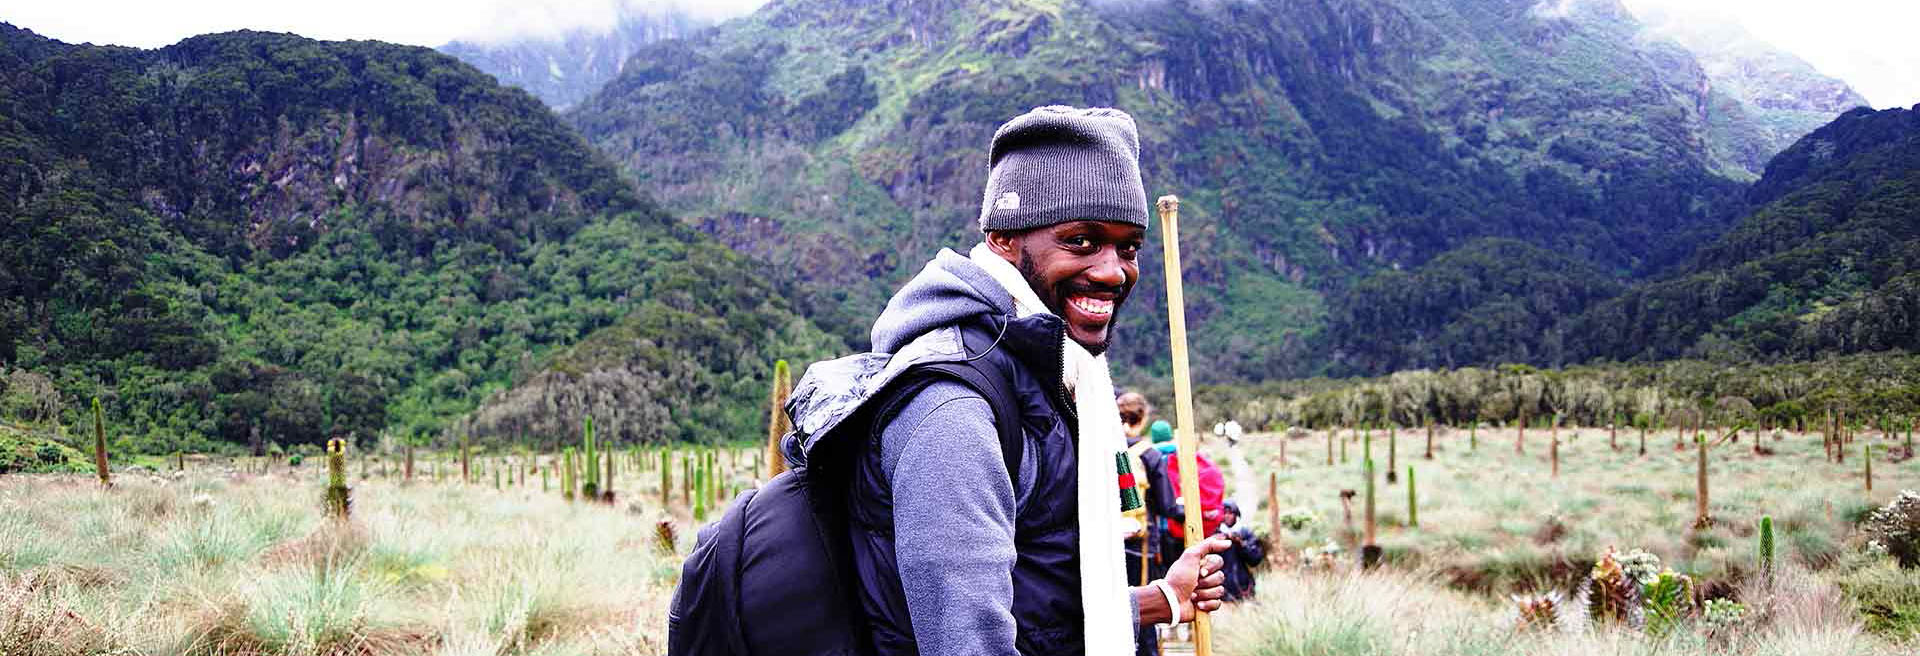 Photo: A hiker in Rwenzori Mountains. Contact Kwezi Outdoors for safaris and tours to Uganda.